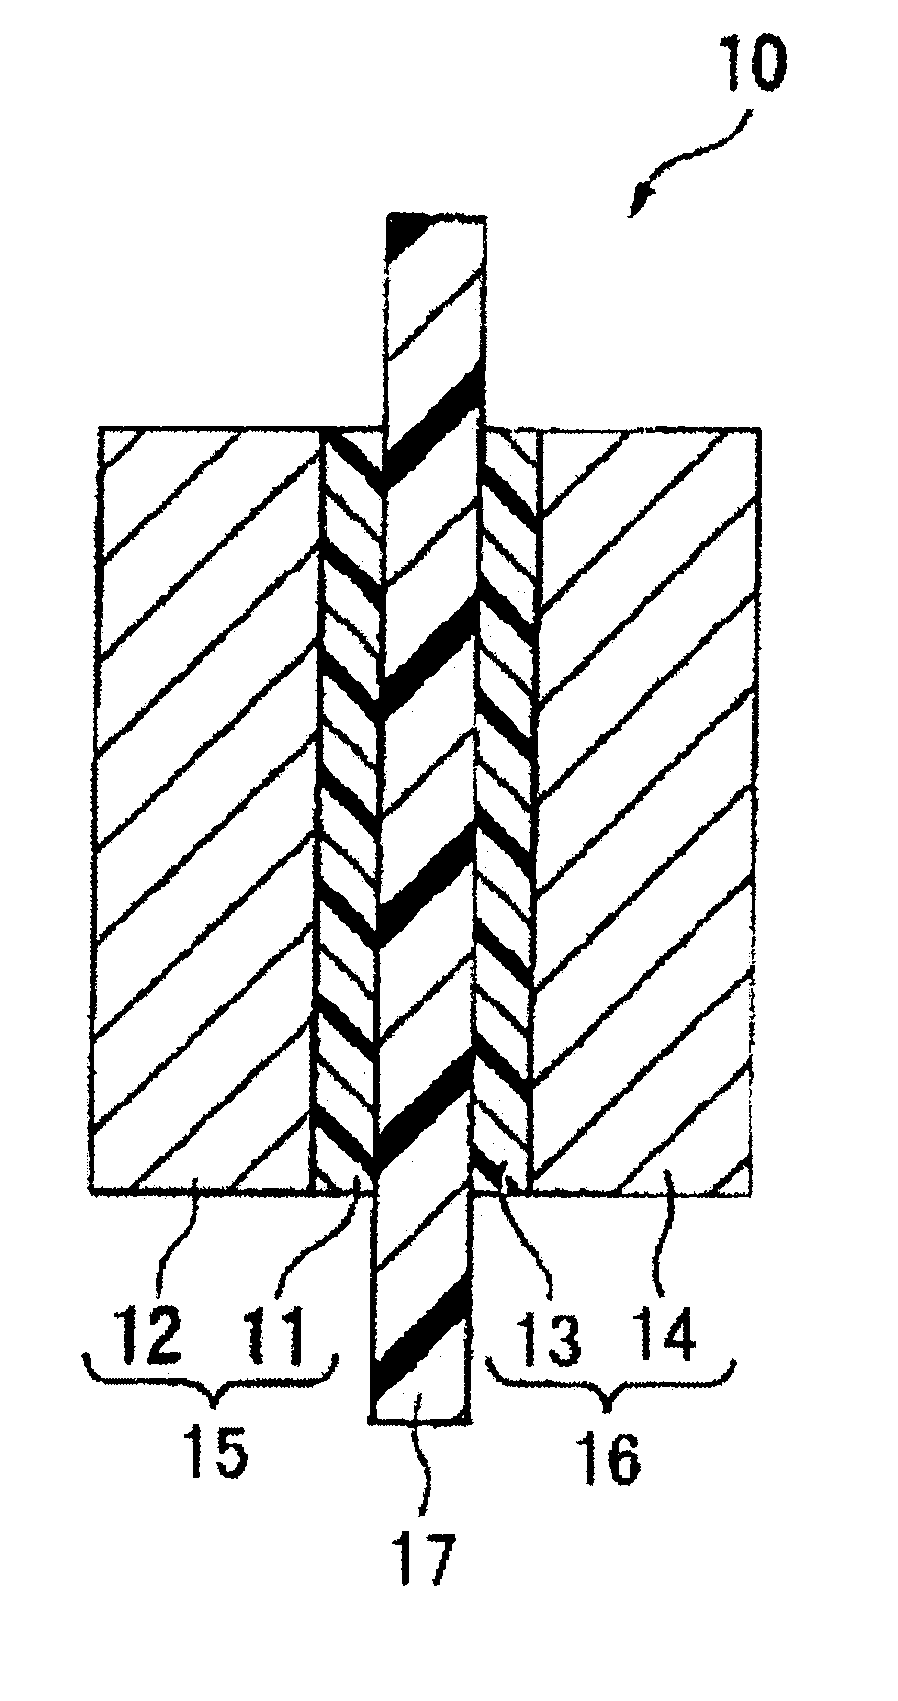 Membrane/electrode assembly for polymer electrolyte fuel cell and process for producing membrane/electrode assembly for polymer electrolyte fuel cell